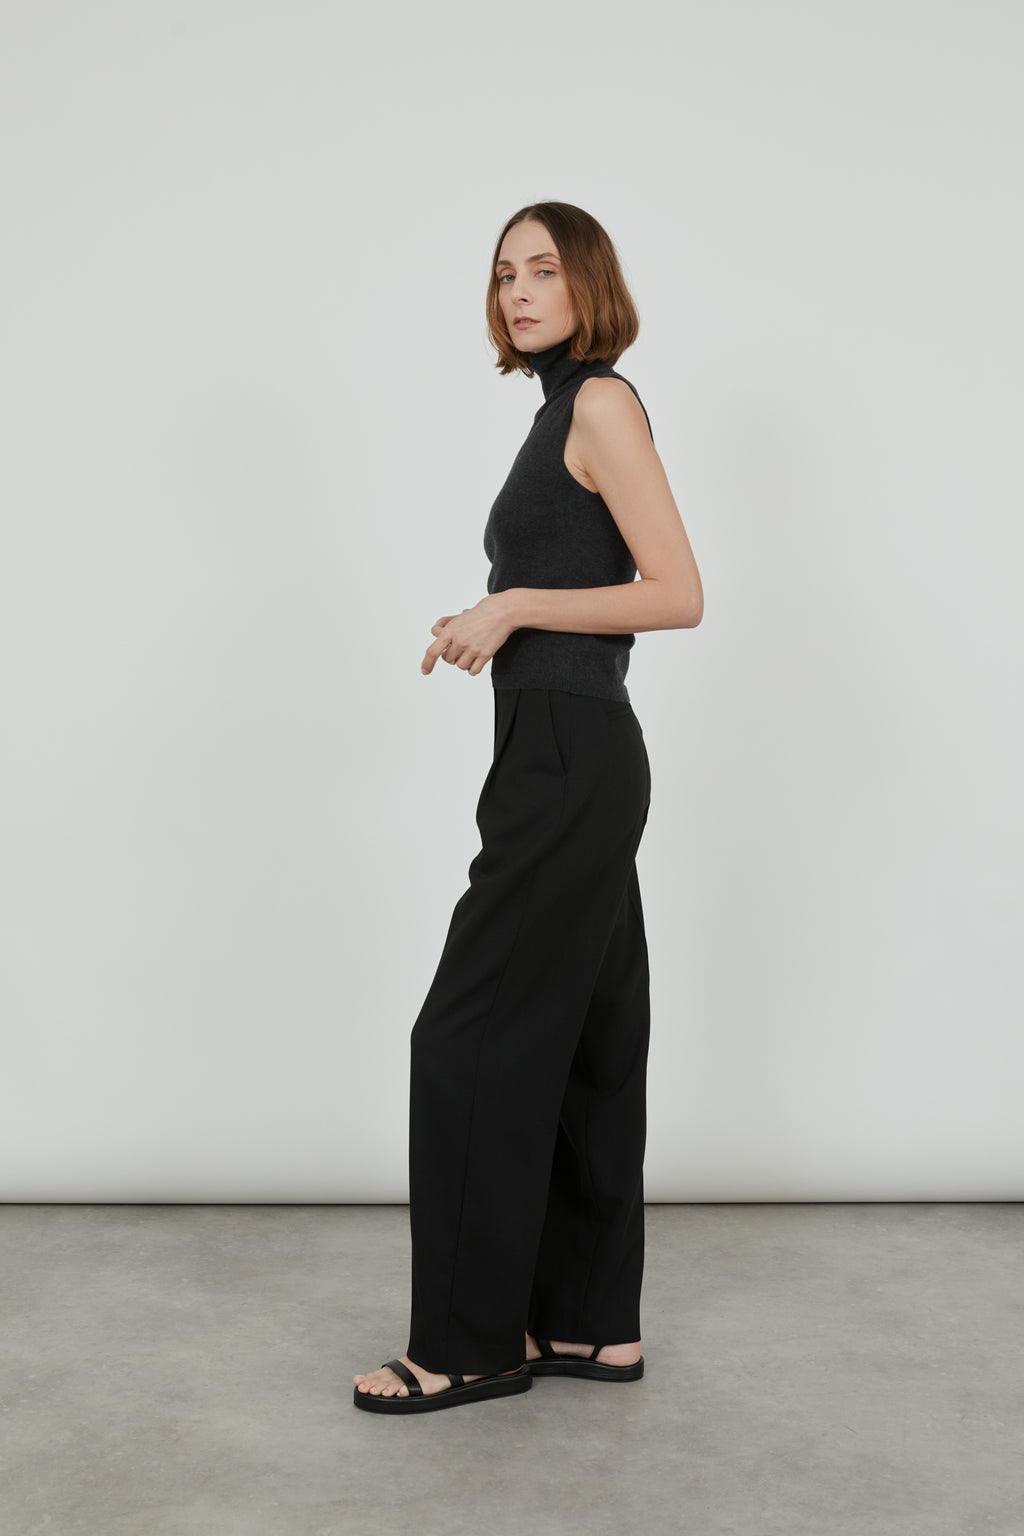 Deborah sleeveless top in the softest merino, cashmere and silk blend with black tailored trousers.